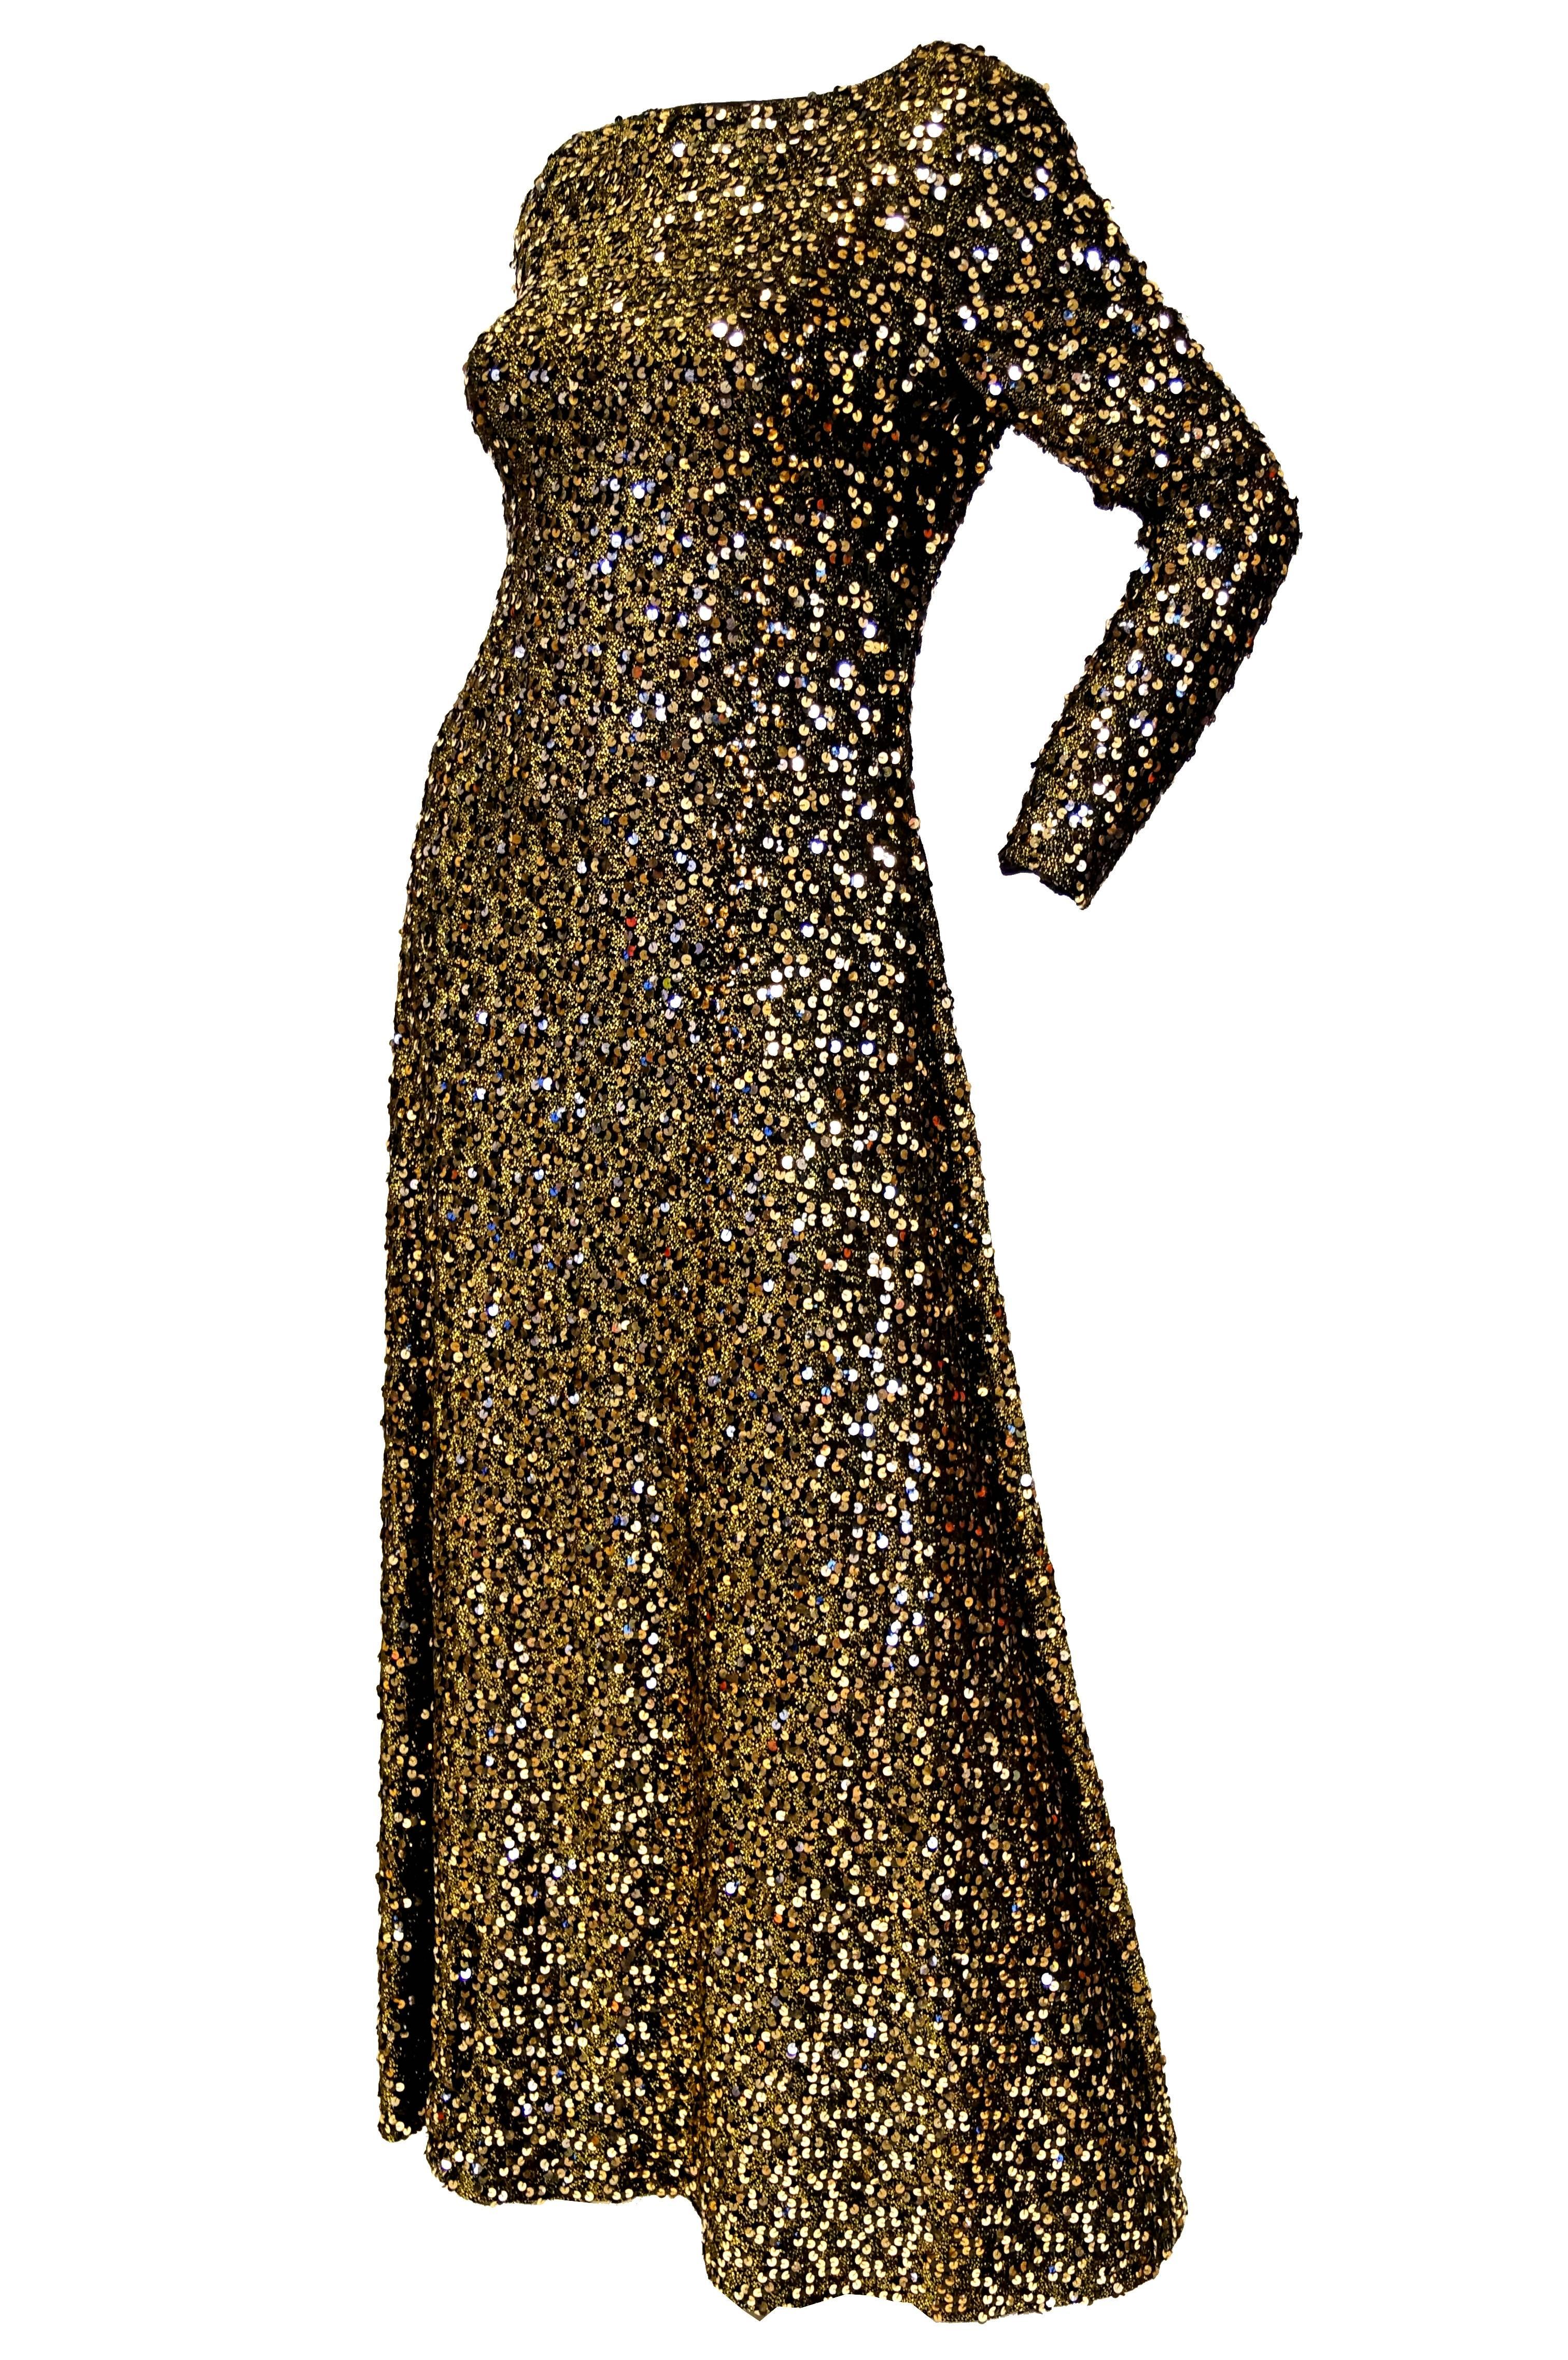 1970s Jill Richards Plunge Back Fully Sequined Black and Gold Evening Dress In Excellent Condition For Sale In Houston, TX